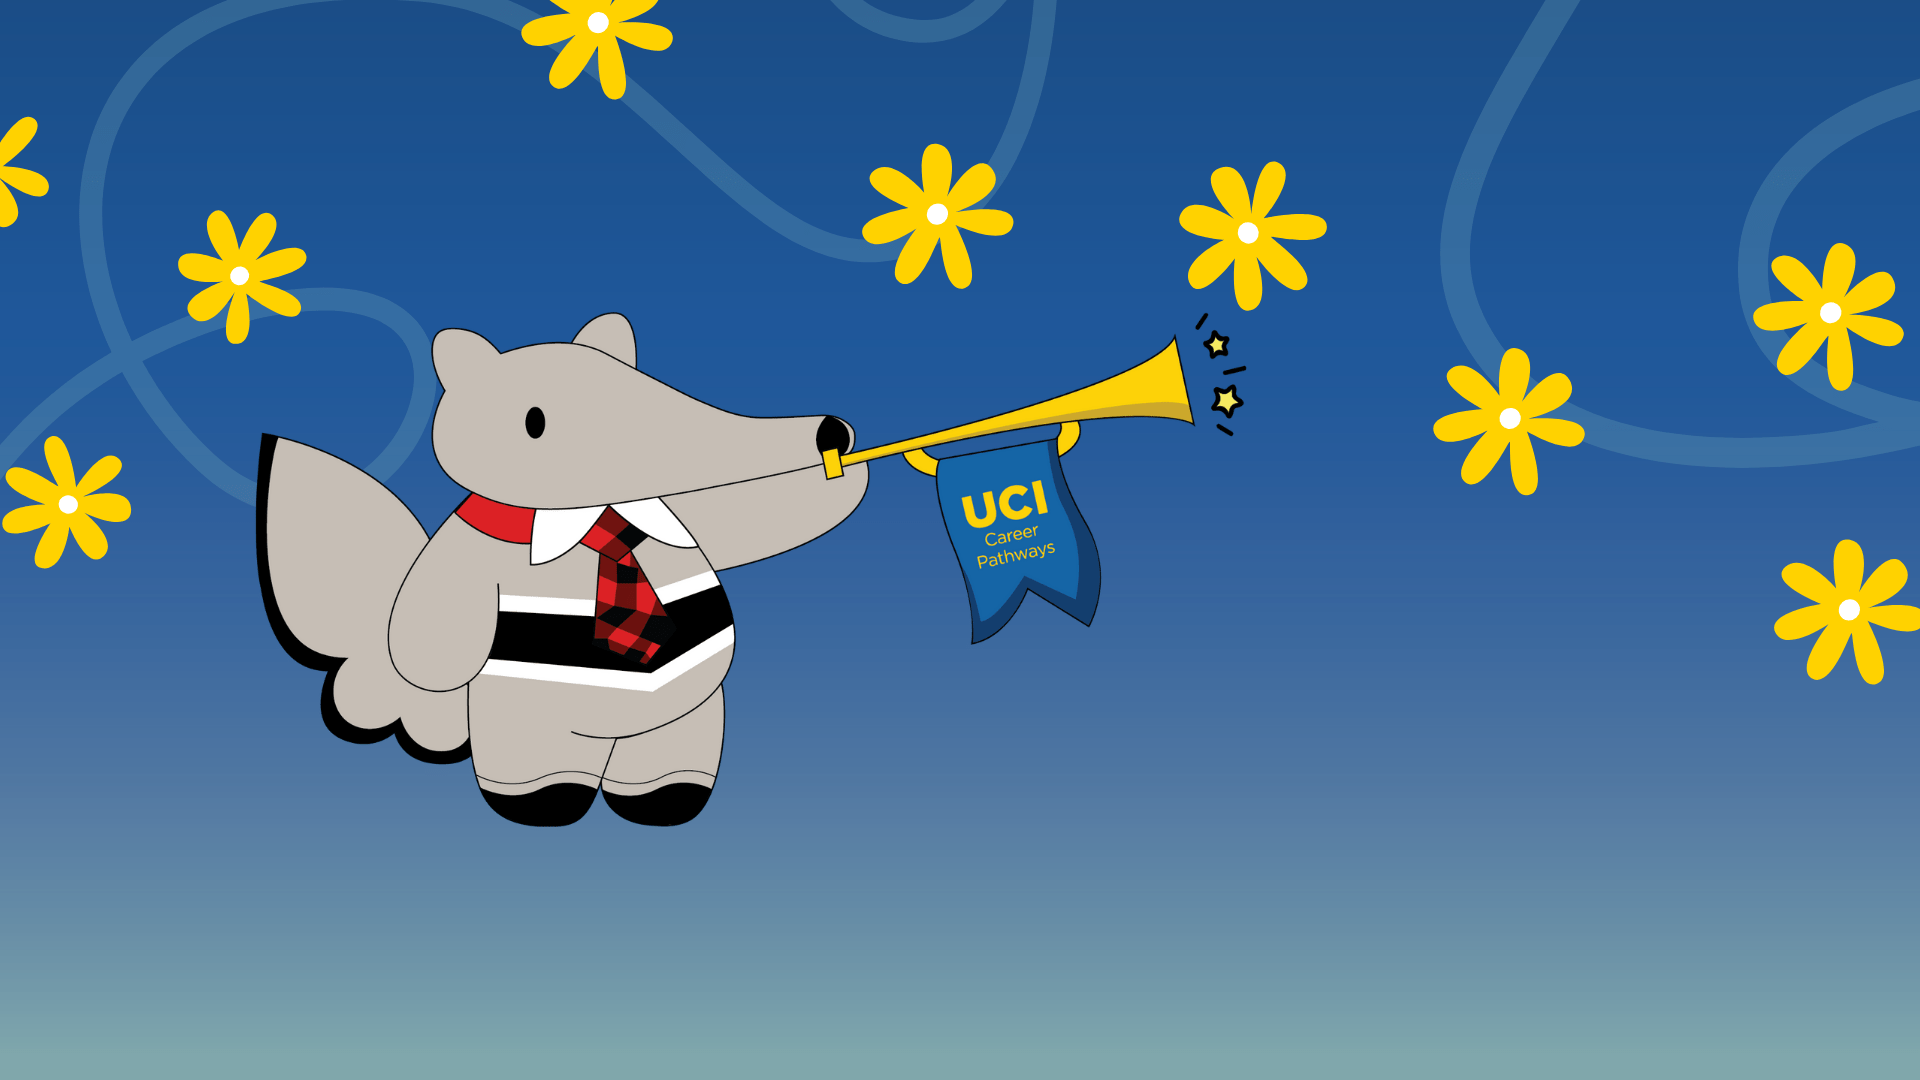 Peter the Anteater illustration blowing a horn with a UCI Career Pathways flag